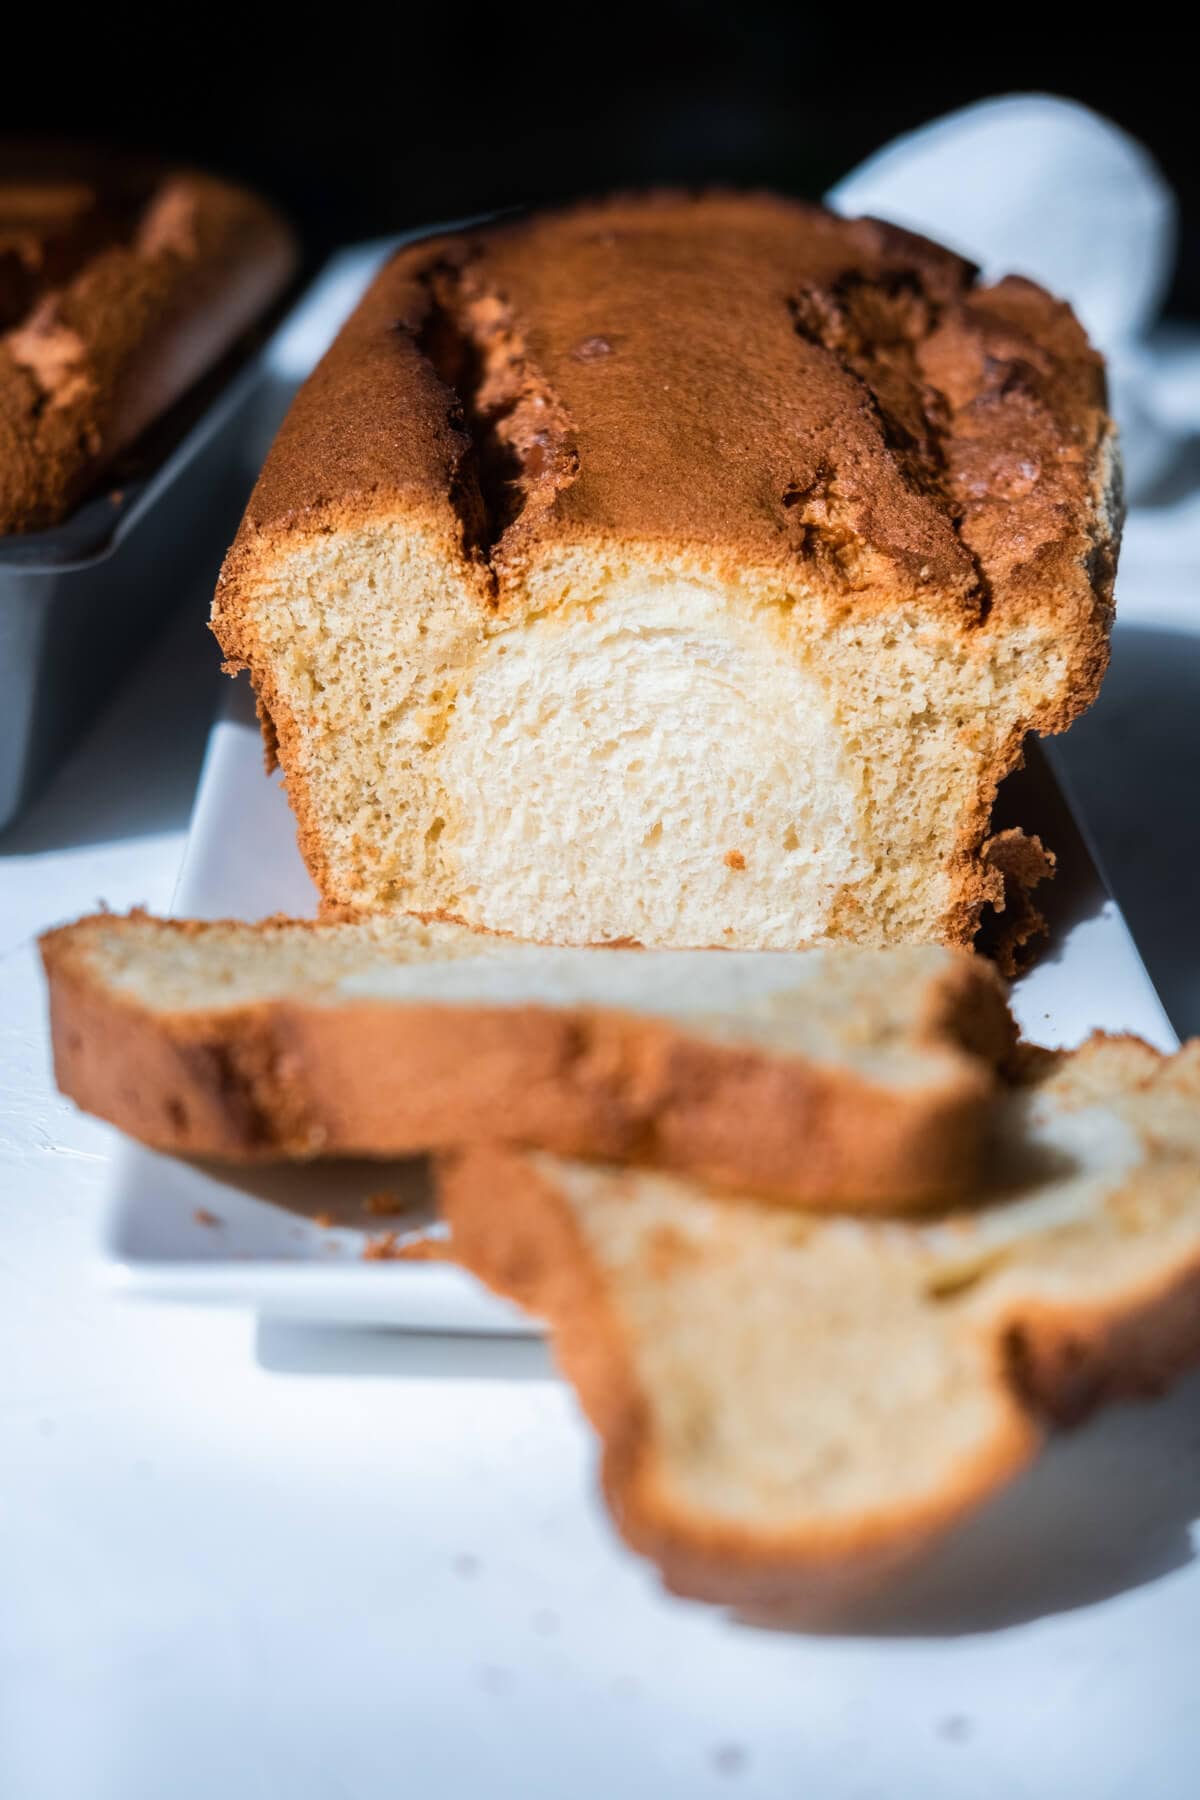 Sweet white bread coated with aromatic coffee cake and made into a loaf. 